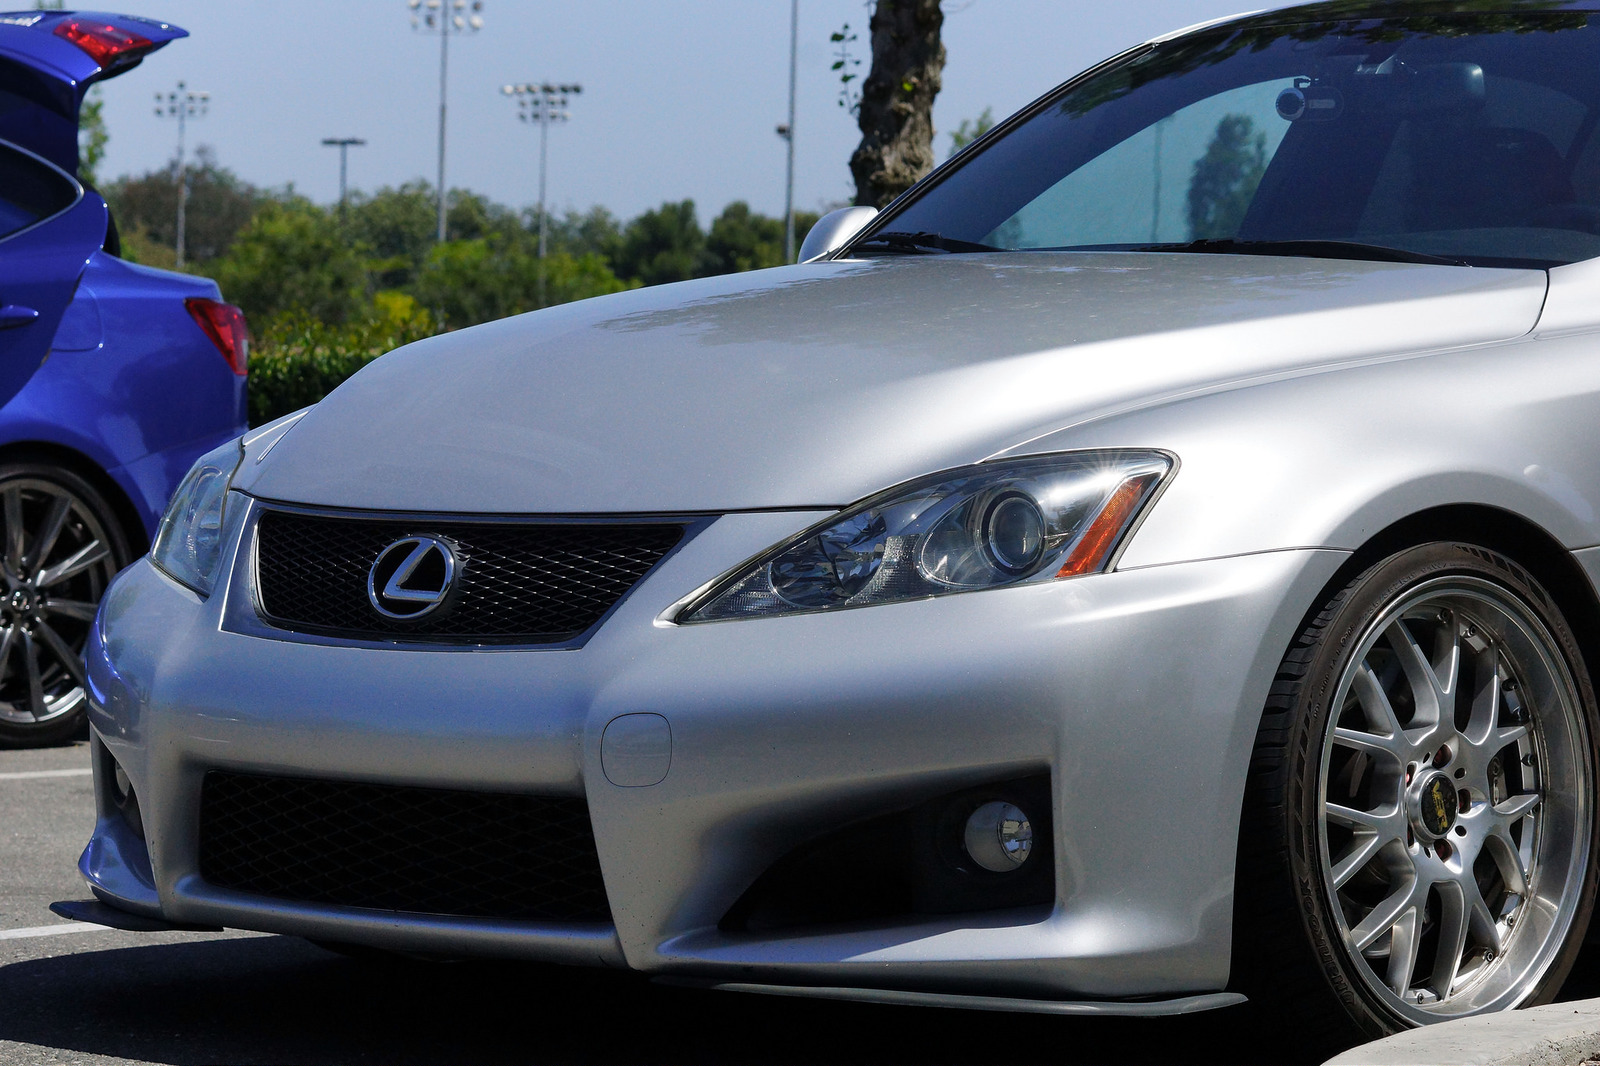 Isf bumper converted, need lip help! - ClubLexus - Lexus Forum Discussion